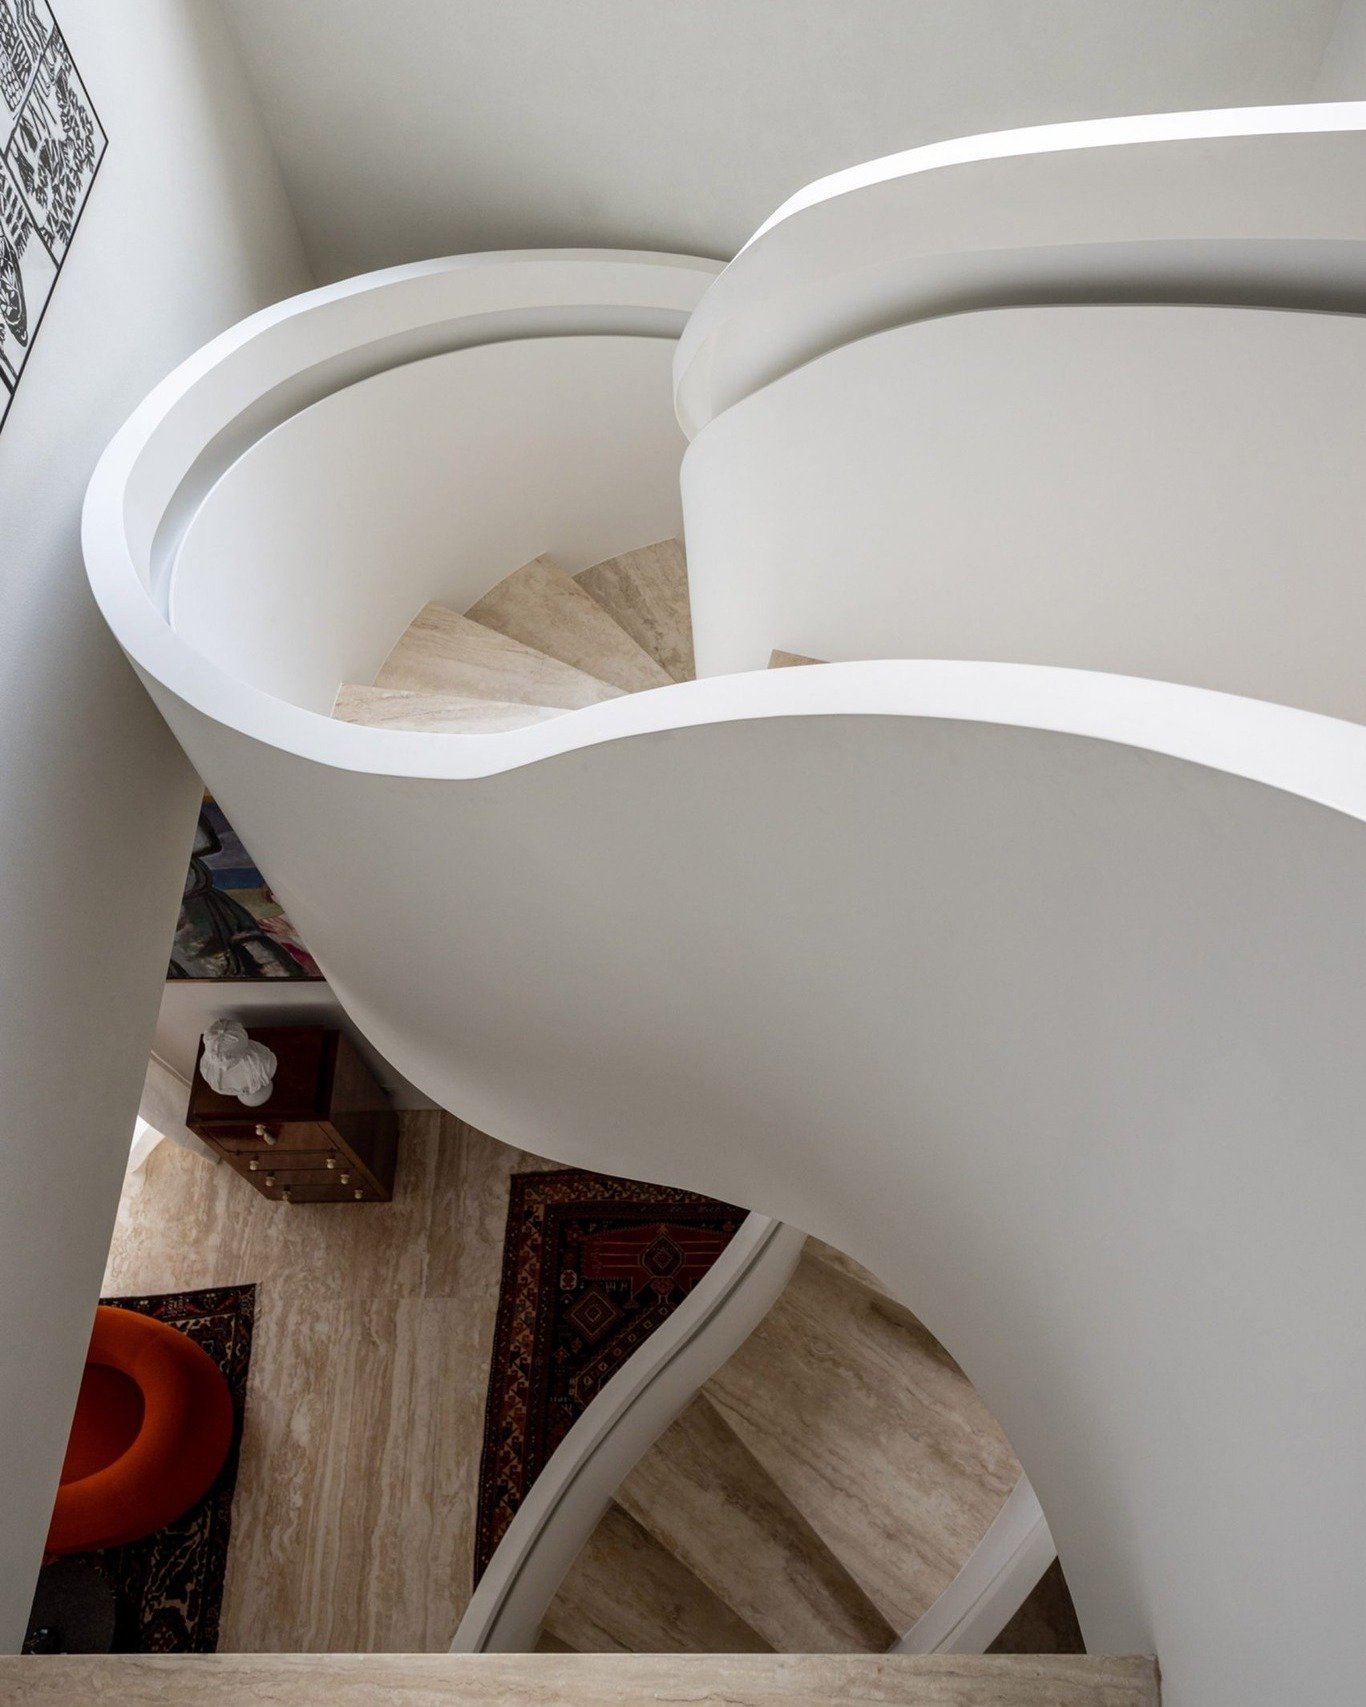 &quot;... A sculptural staircase snakes between the levels of the duplex apartment. The renovation of this 960-square-metre Frederic Chopin Apartment was led by architect Marina Cardoso de Almeida of @triaarquitetura, who reconfigured the layout to m